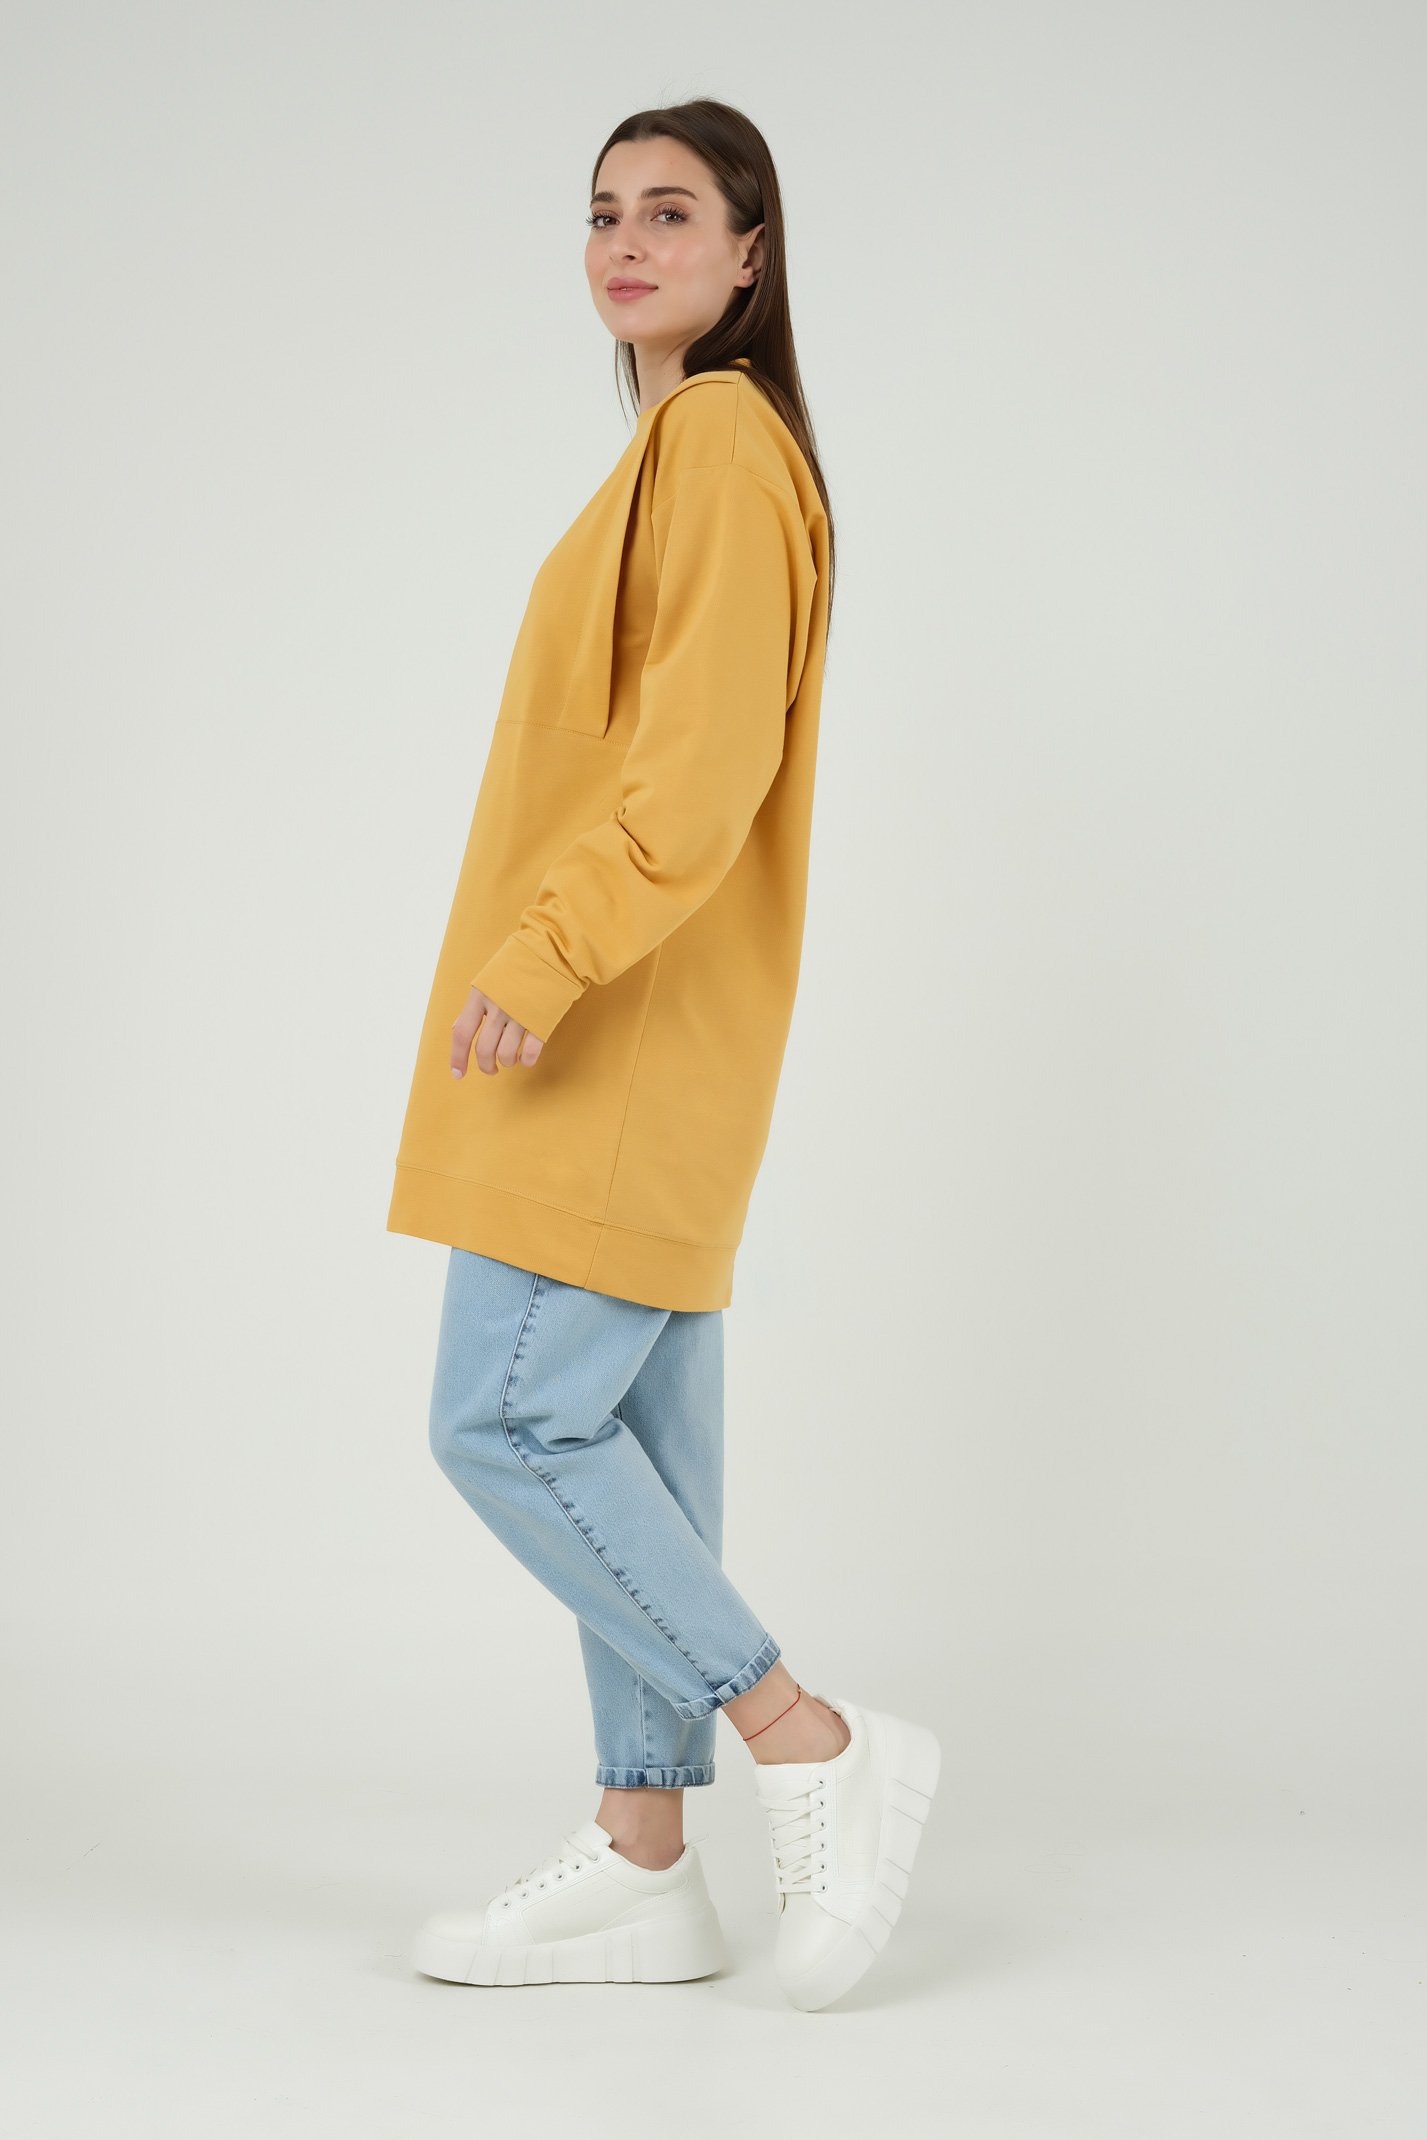 Sweat With Aller Soft Yellow 